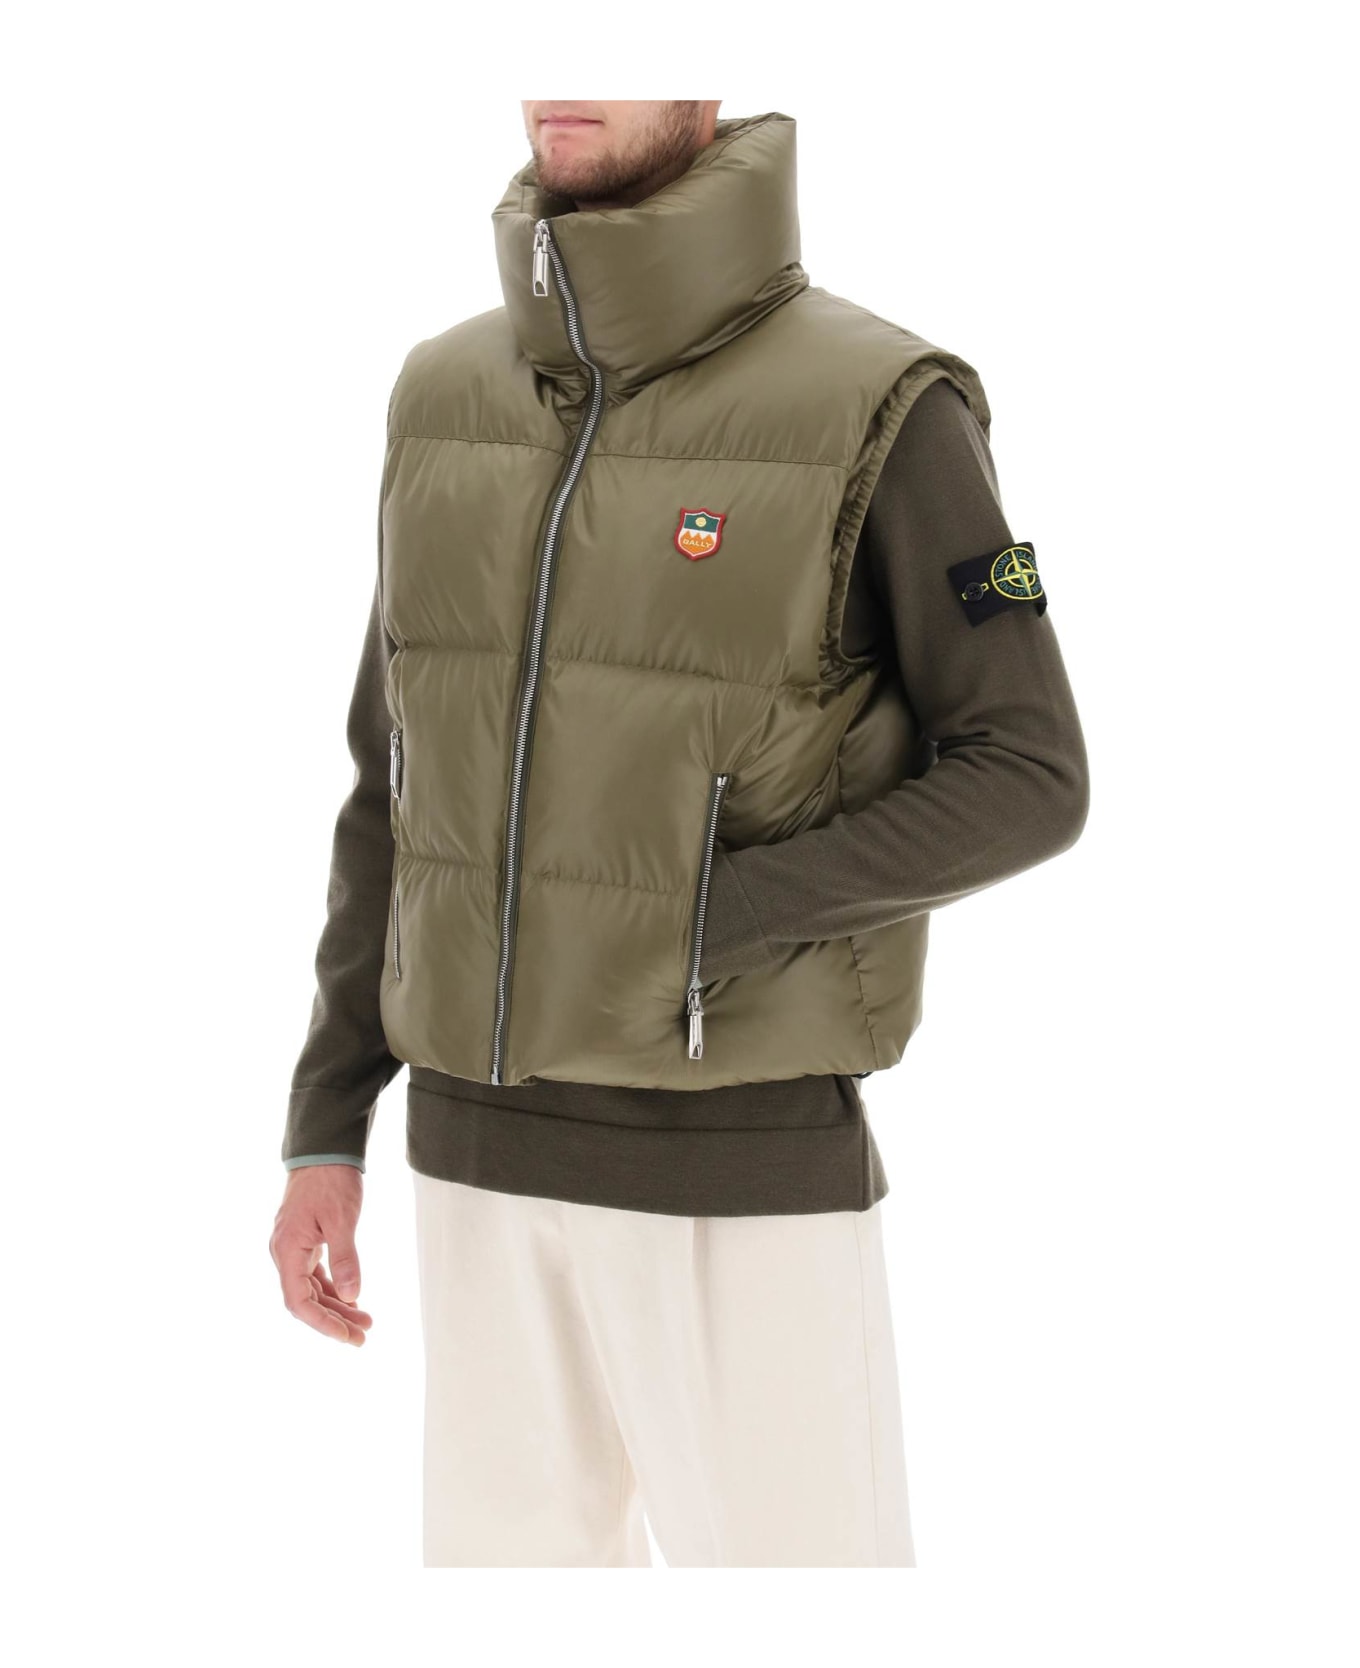 Bally Padded Vest In Ripstop - OLIVE GREEN 23 (Green)